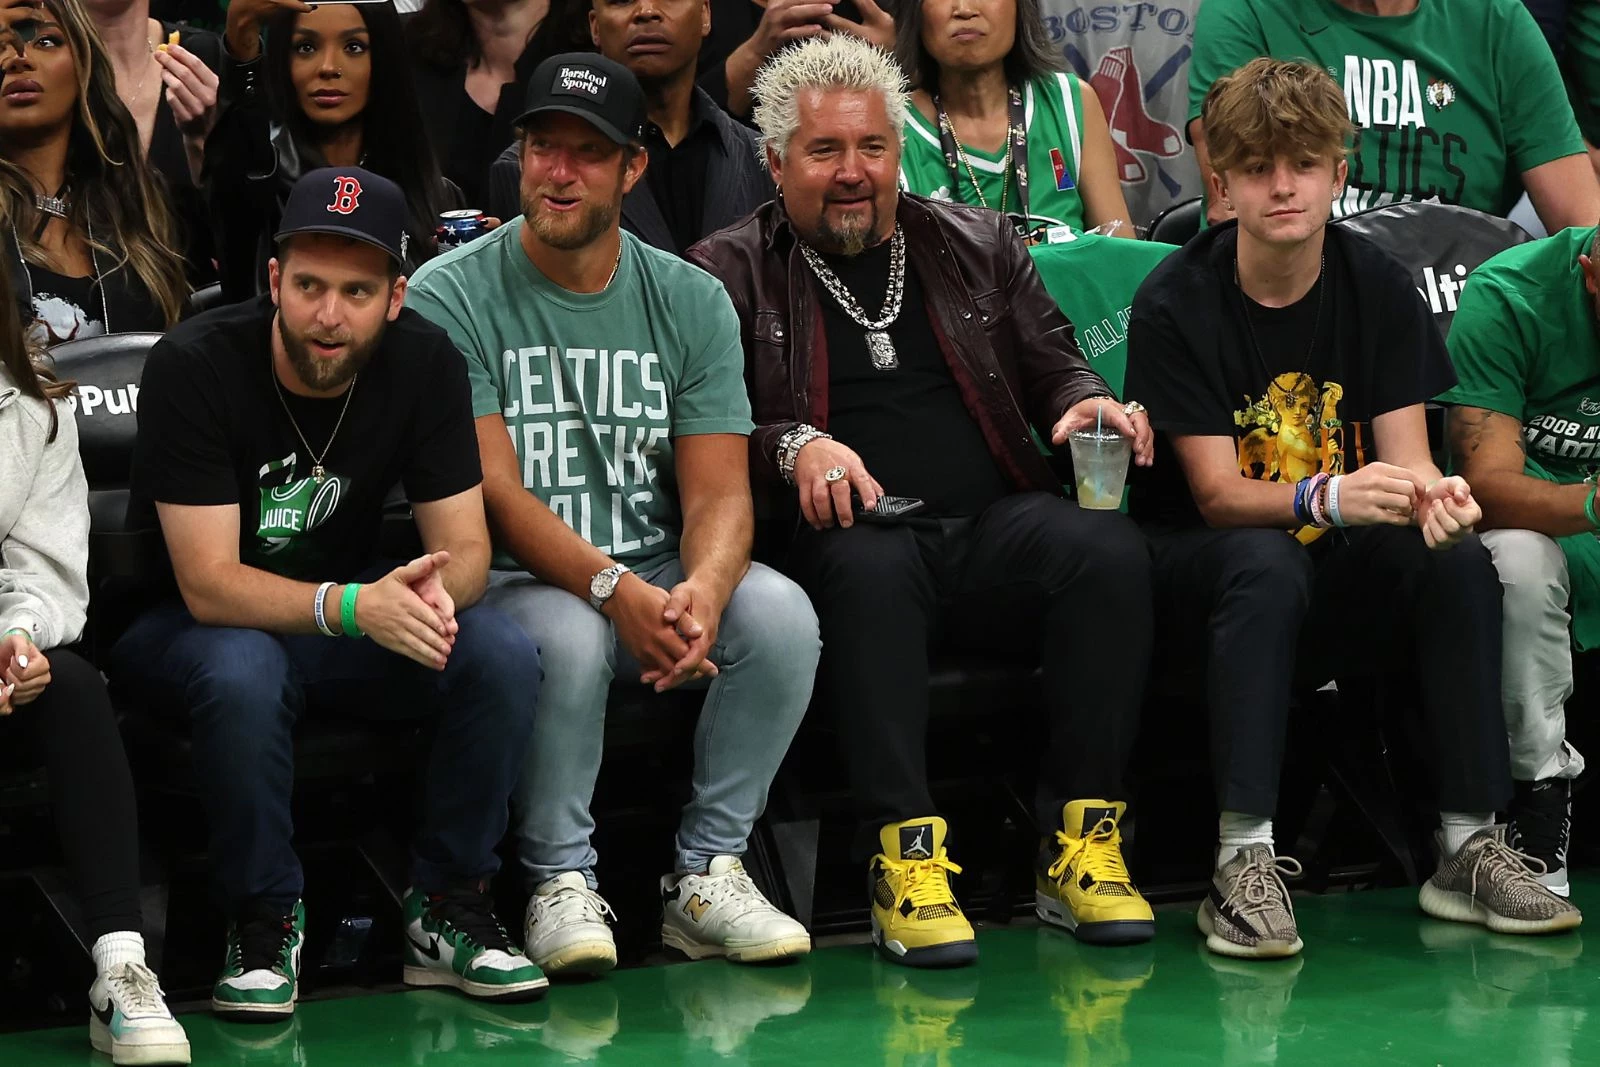 25 Celebs We Hope Show Up in Boston Tonight for the Celtics Game